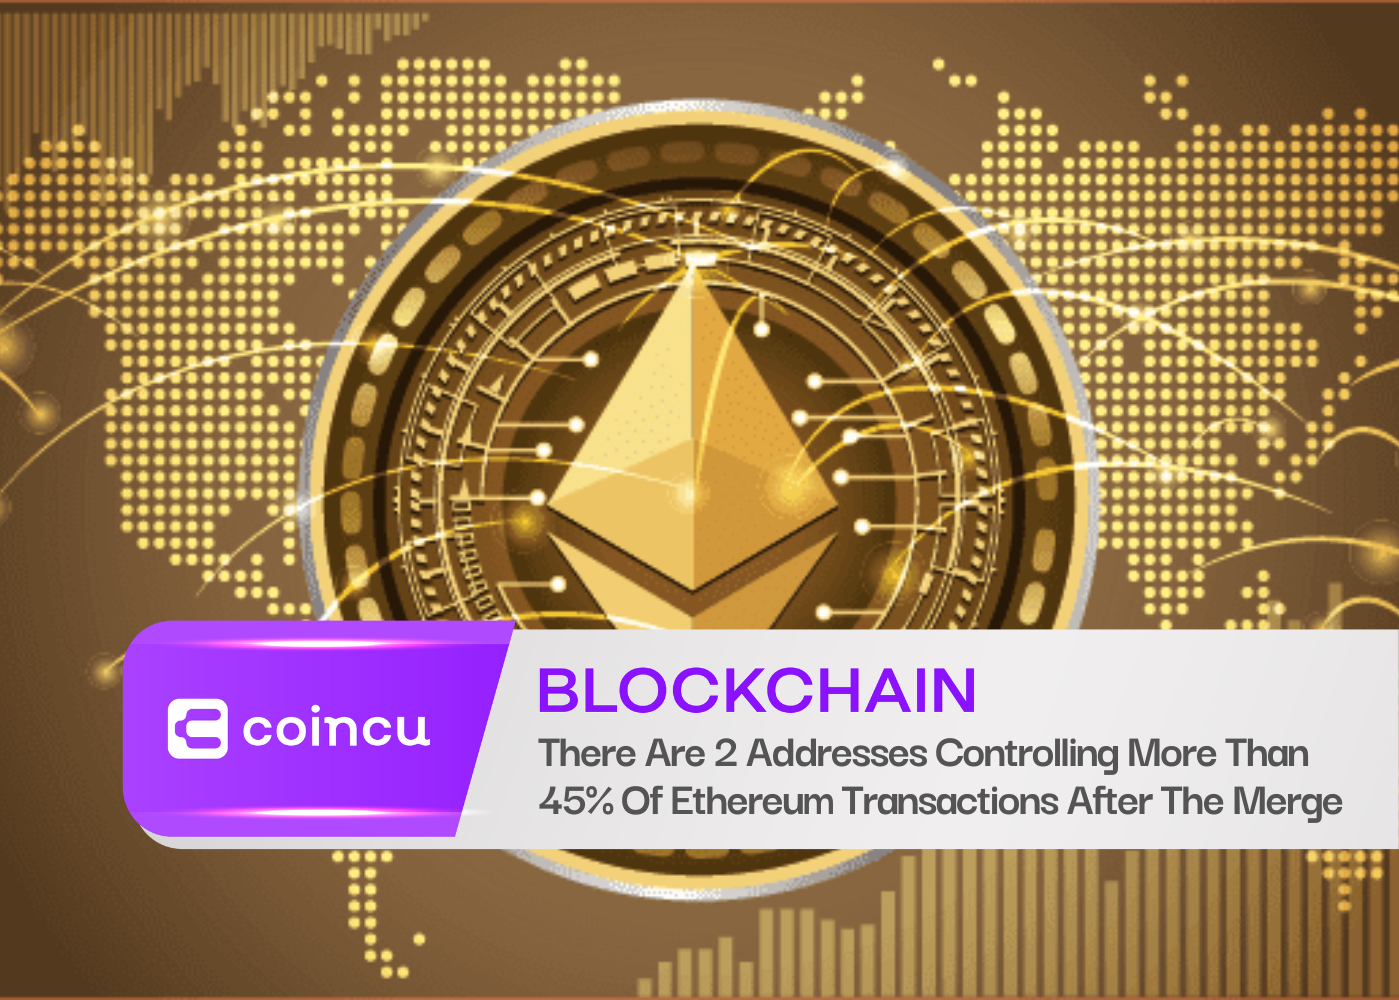 There Are 2 Addresses Controlling More Than 45% Of Ethereum Transactions After The Merge